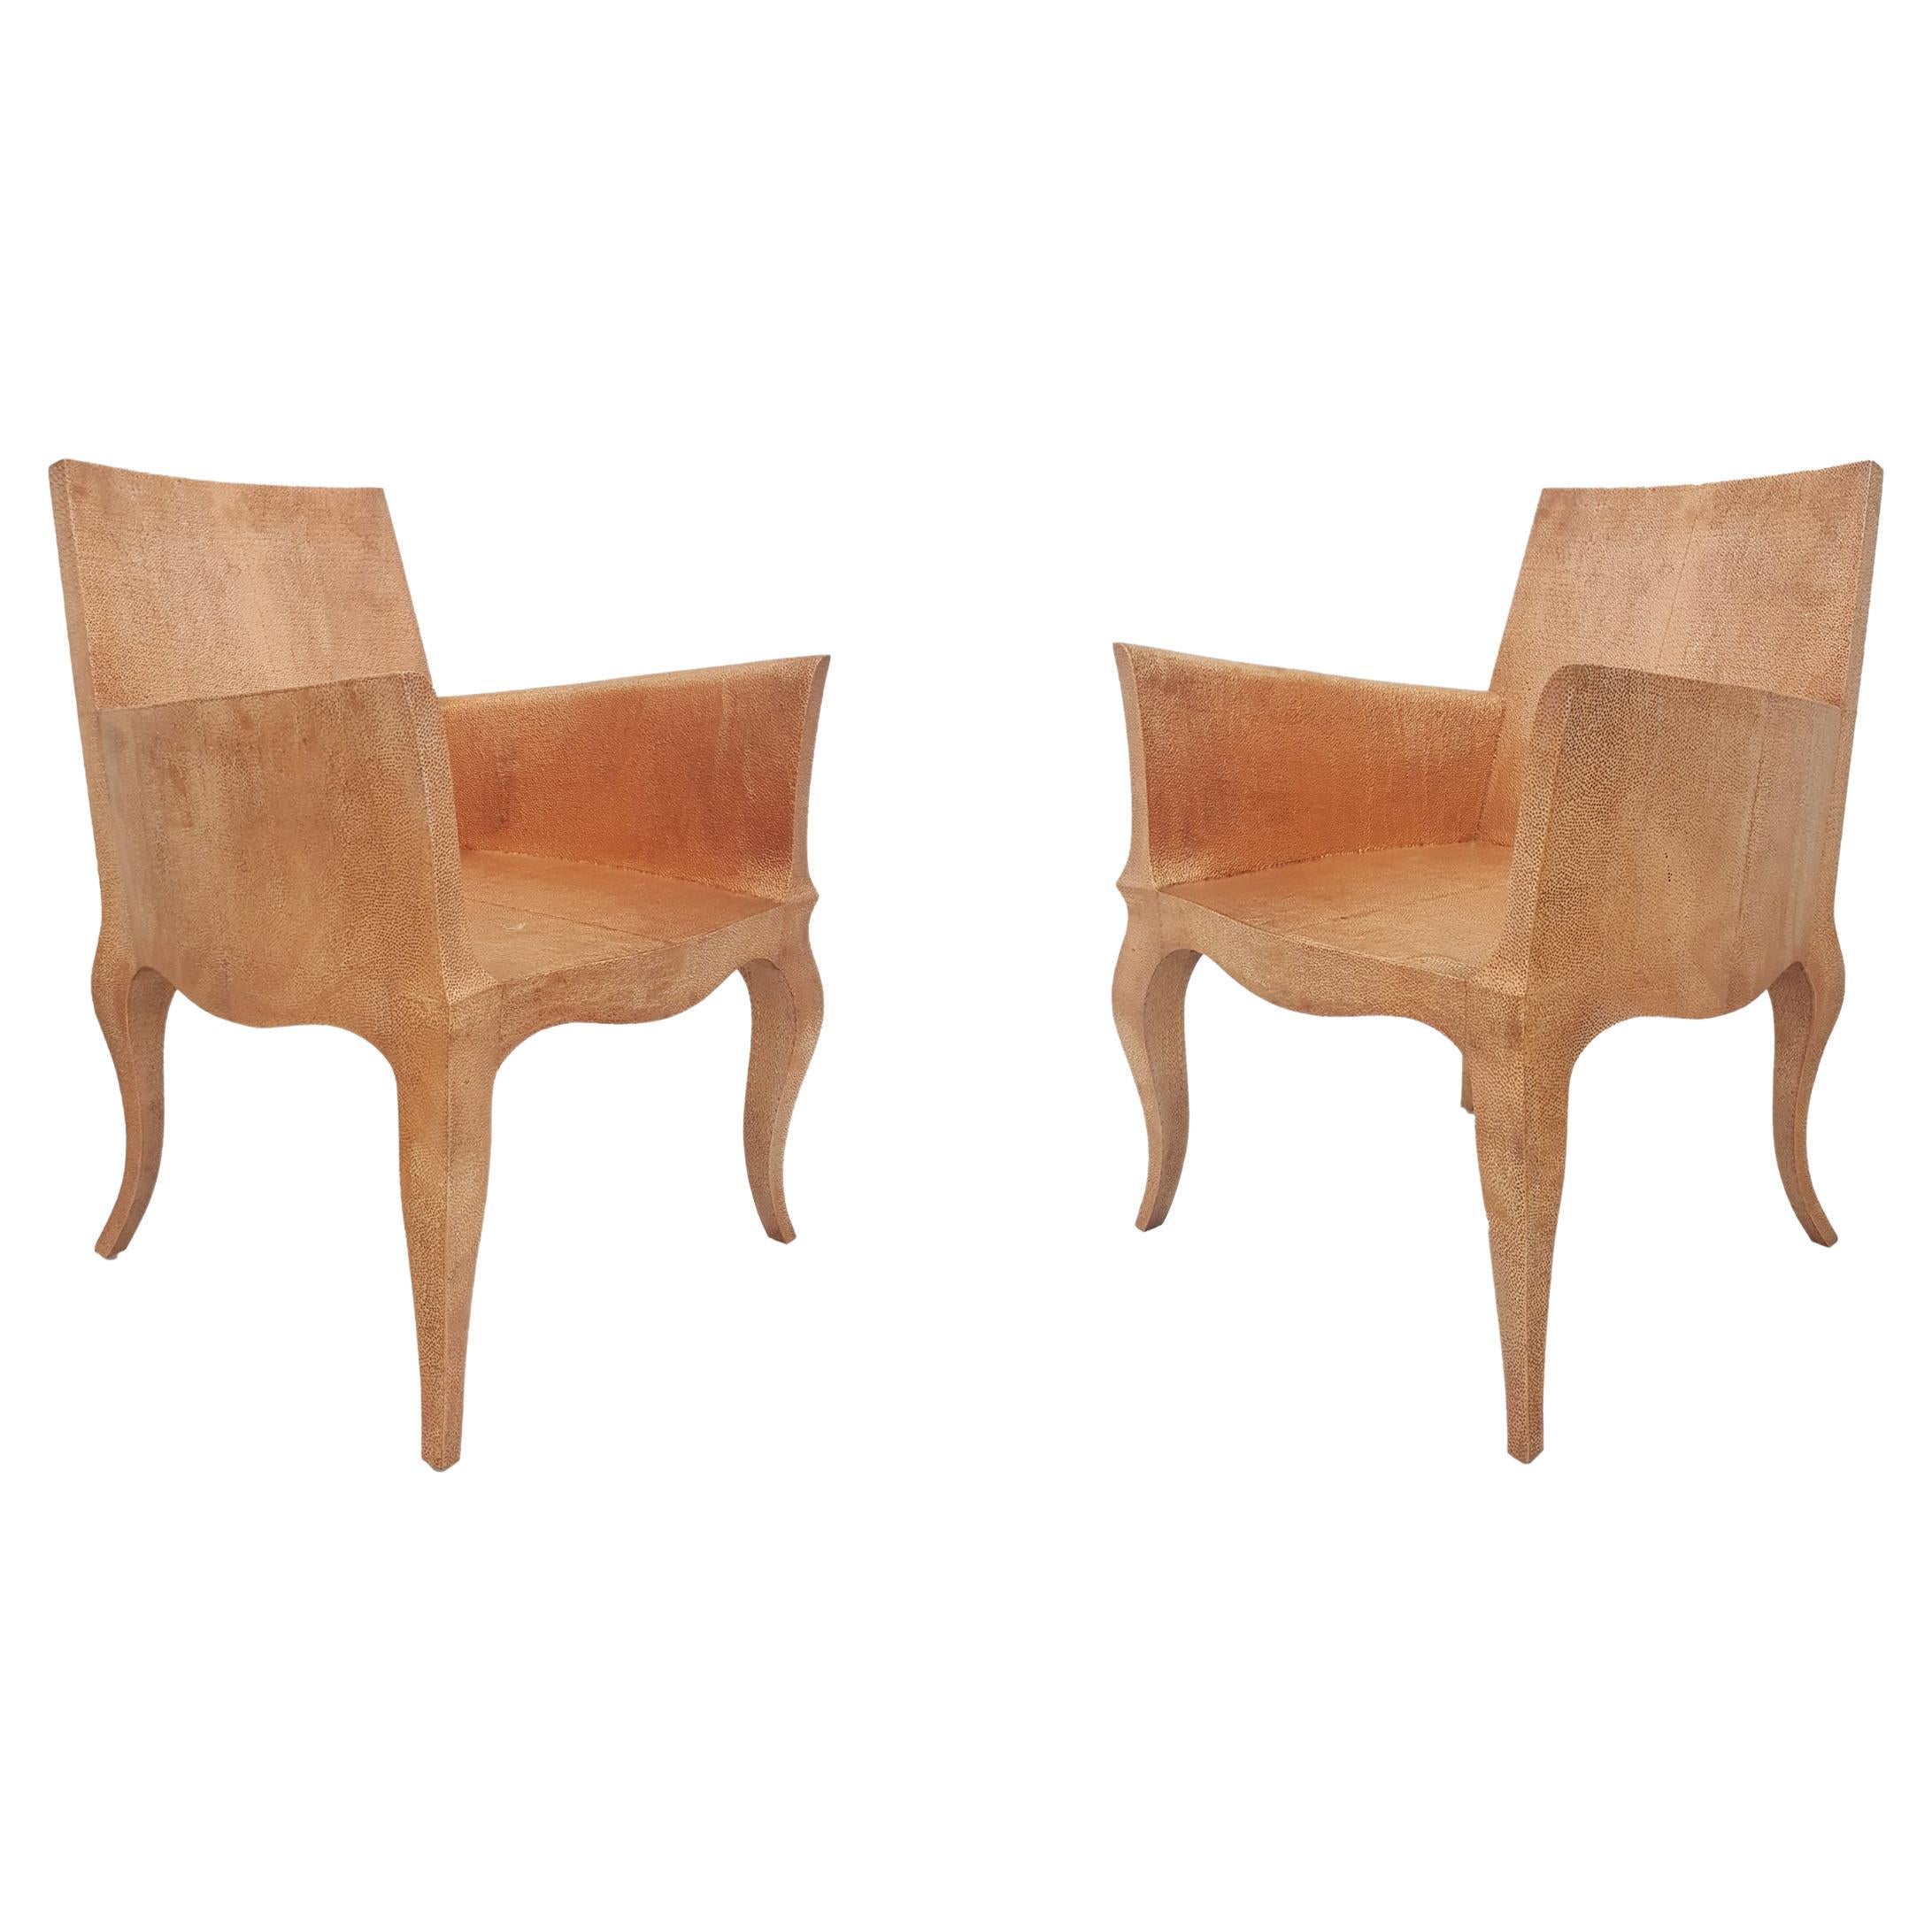 Set of Two Louise Club Chairs in Copper Over Teakwood by Paul Mathieu